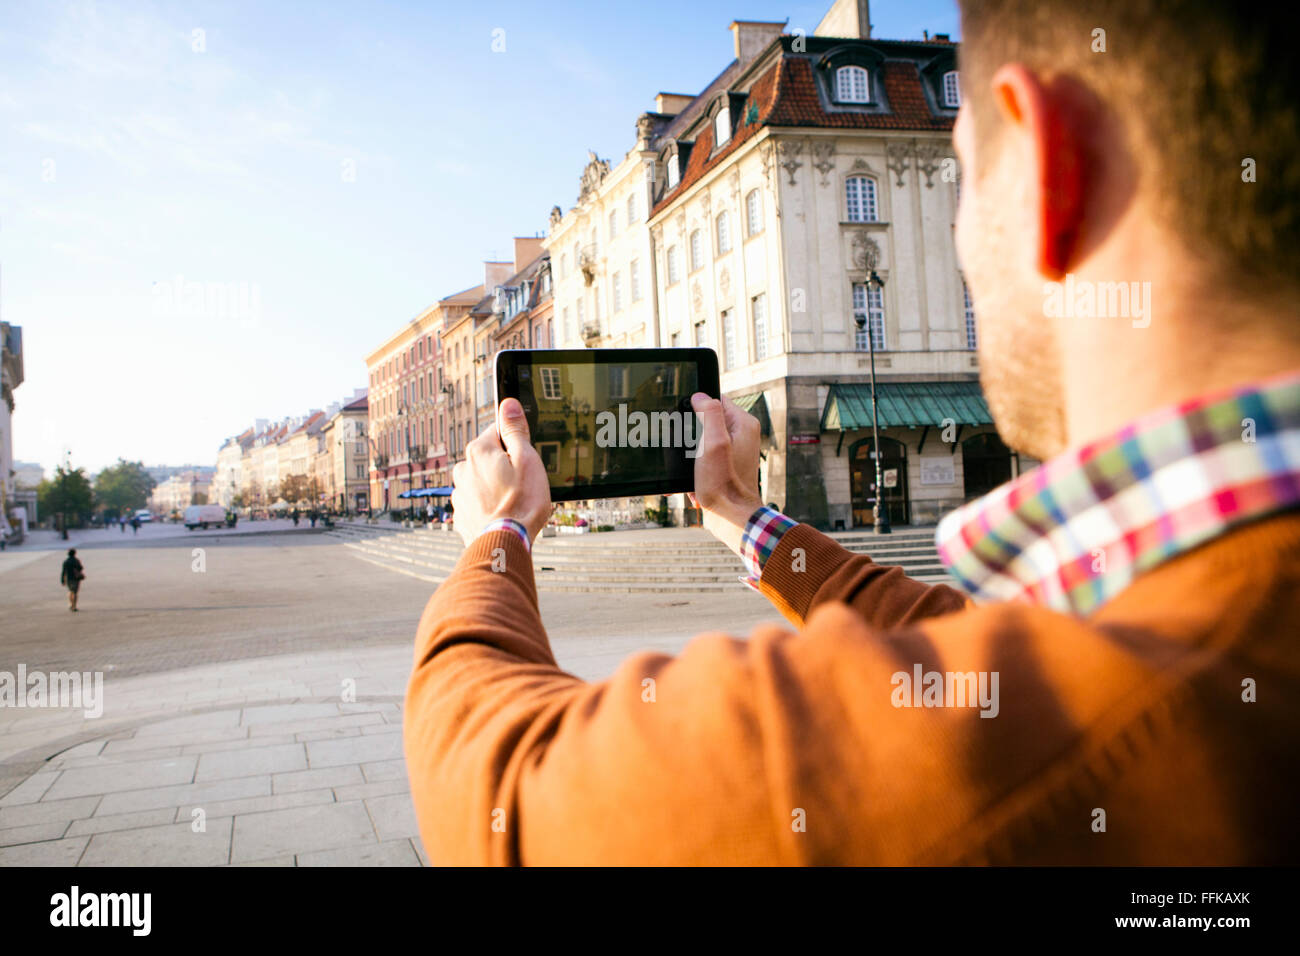 Man on a city break taking a picture with smart phone Stock Photo